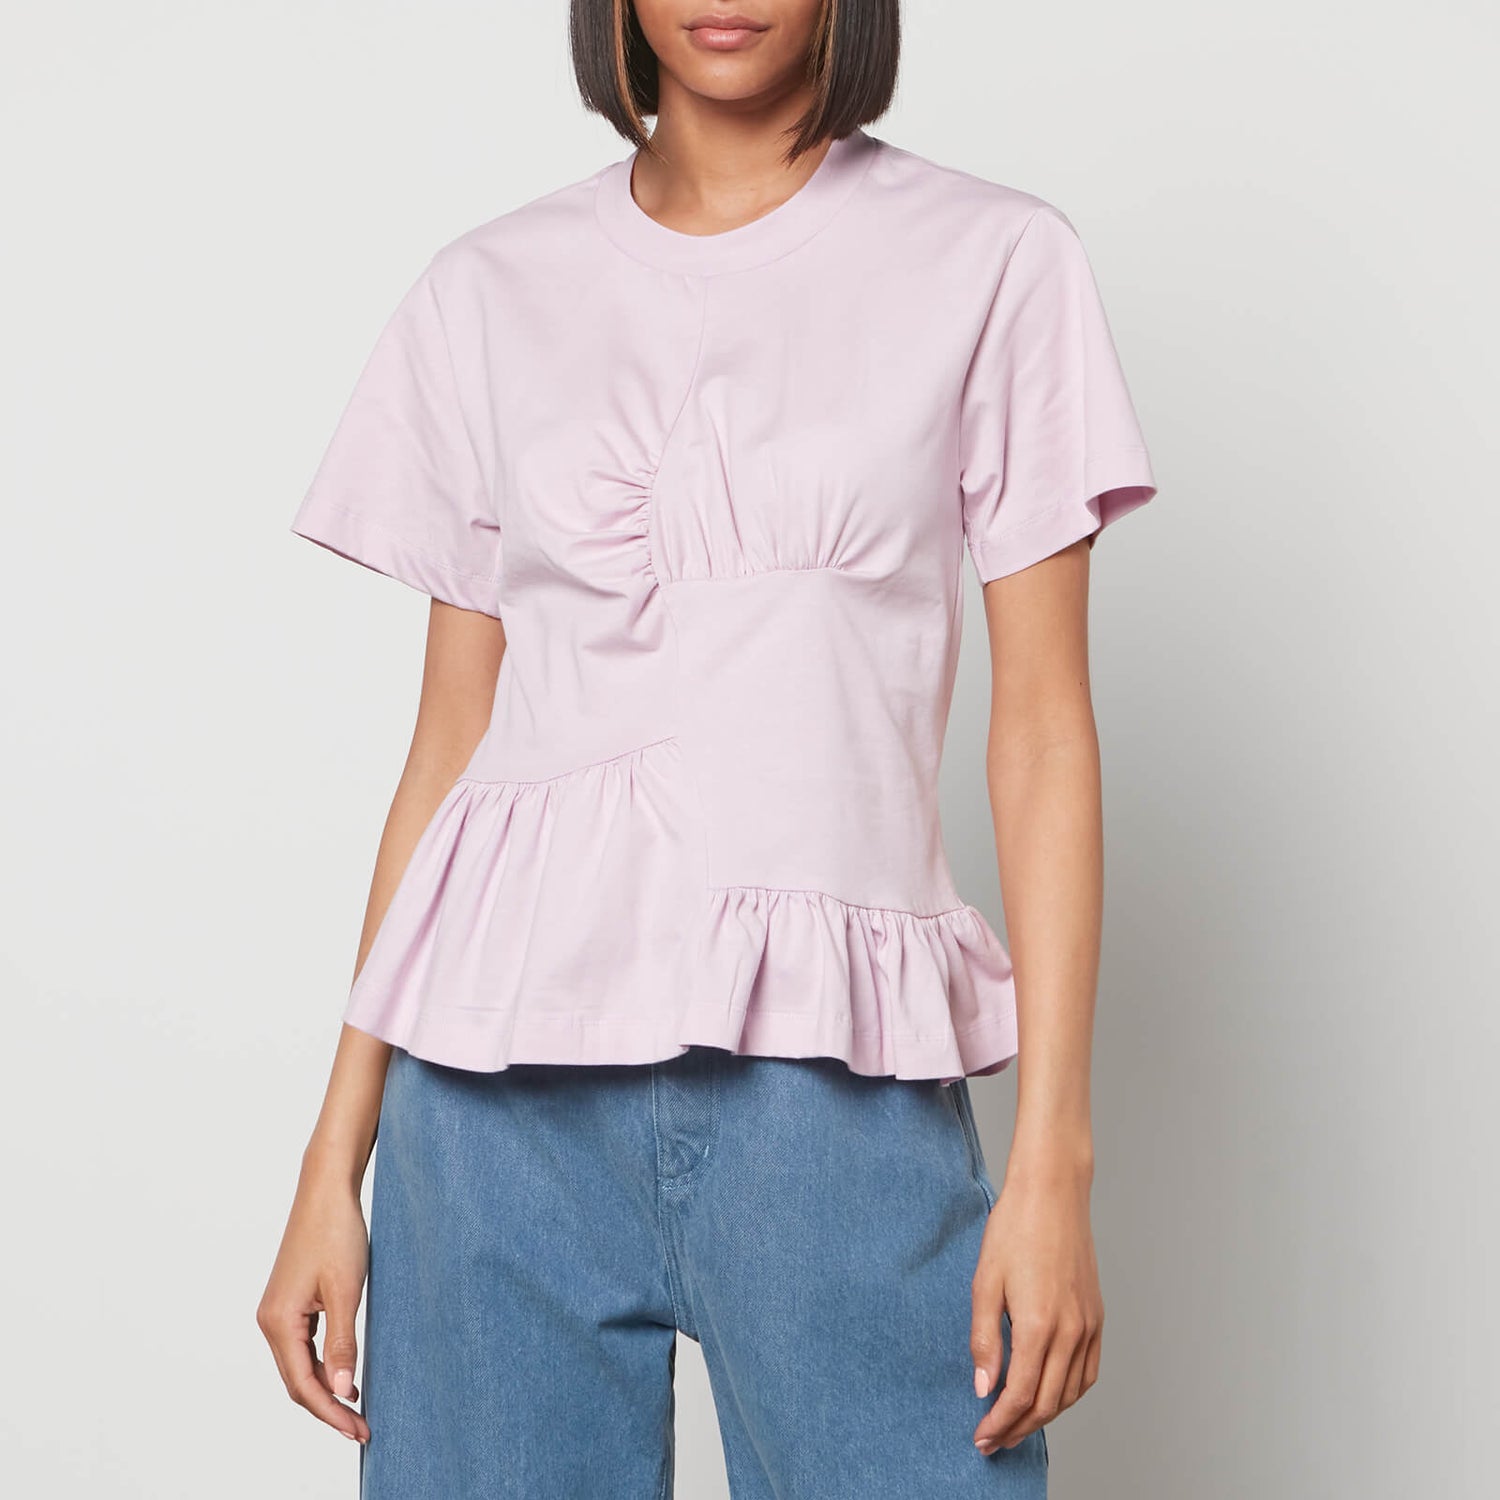 Marques Almeida Women's Panelled Gathered T-Shirt - Lilac - XS